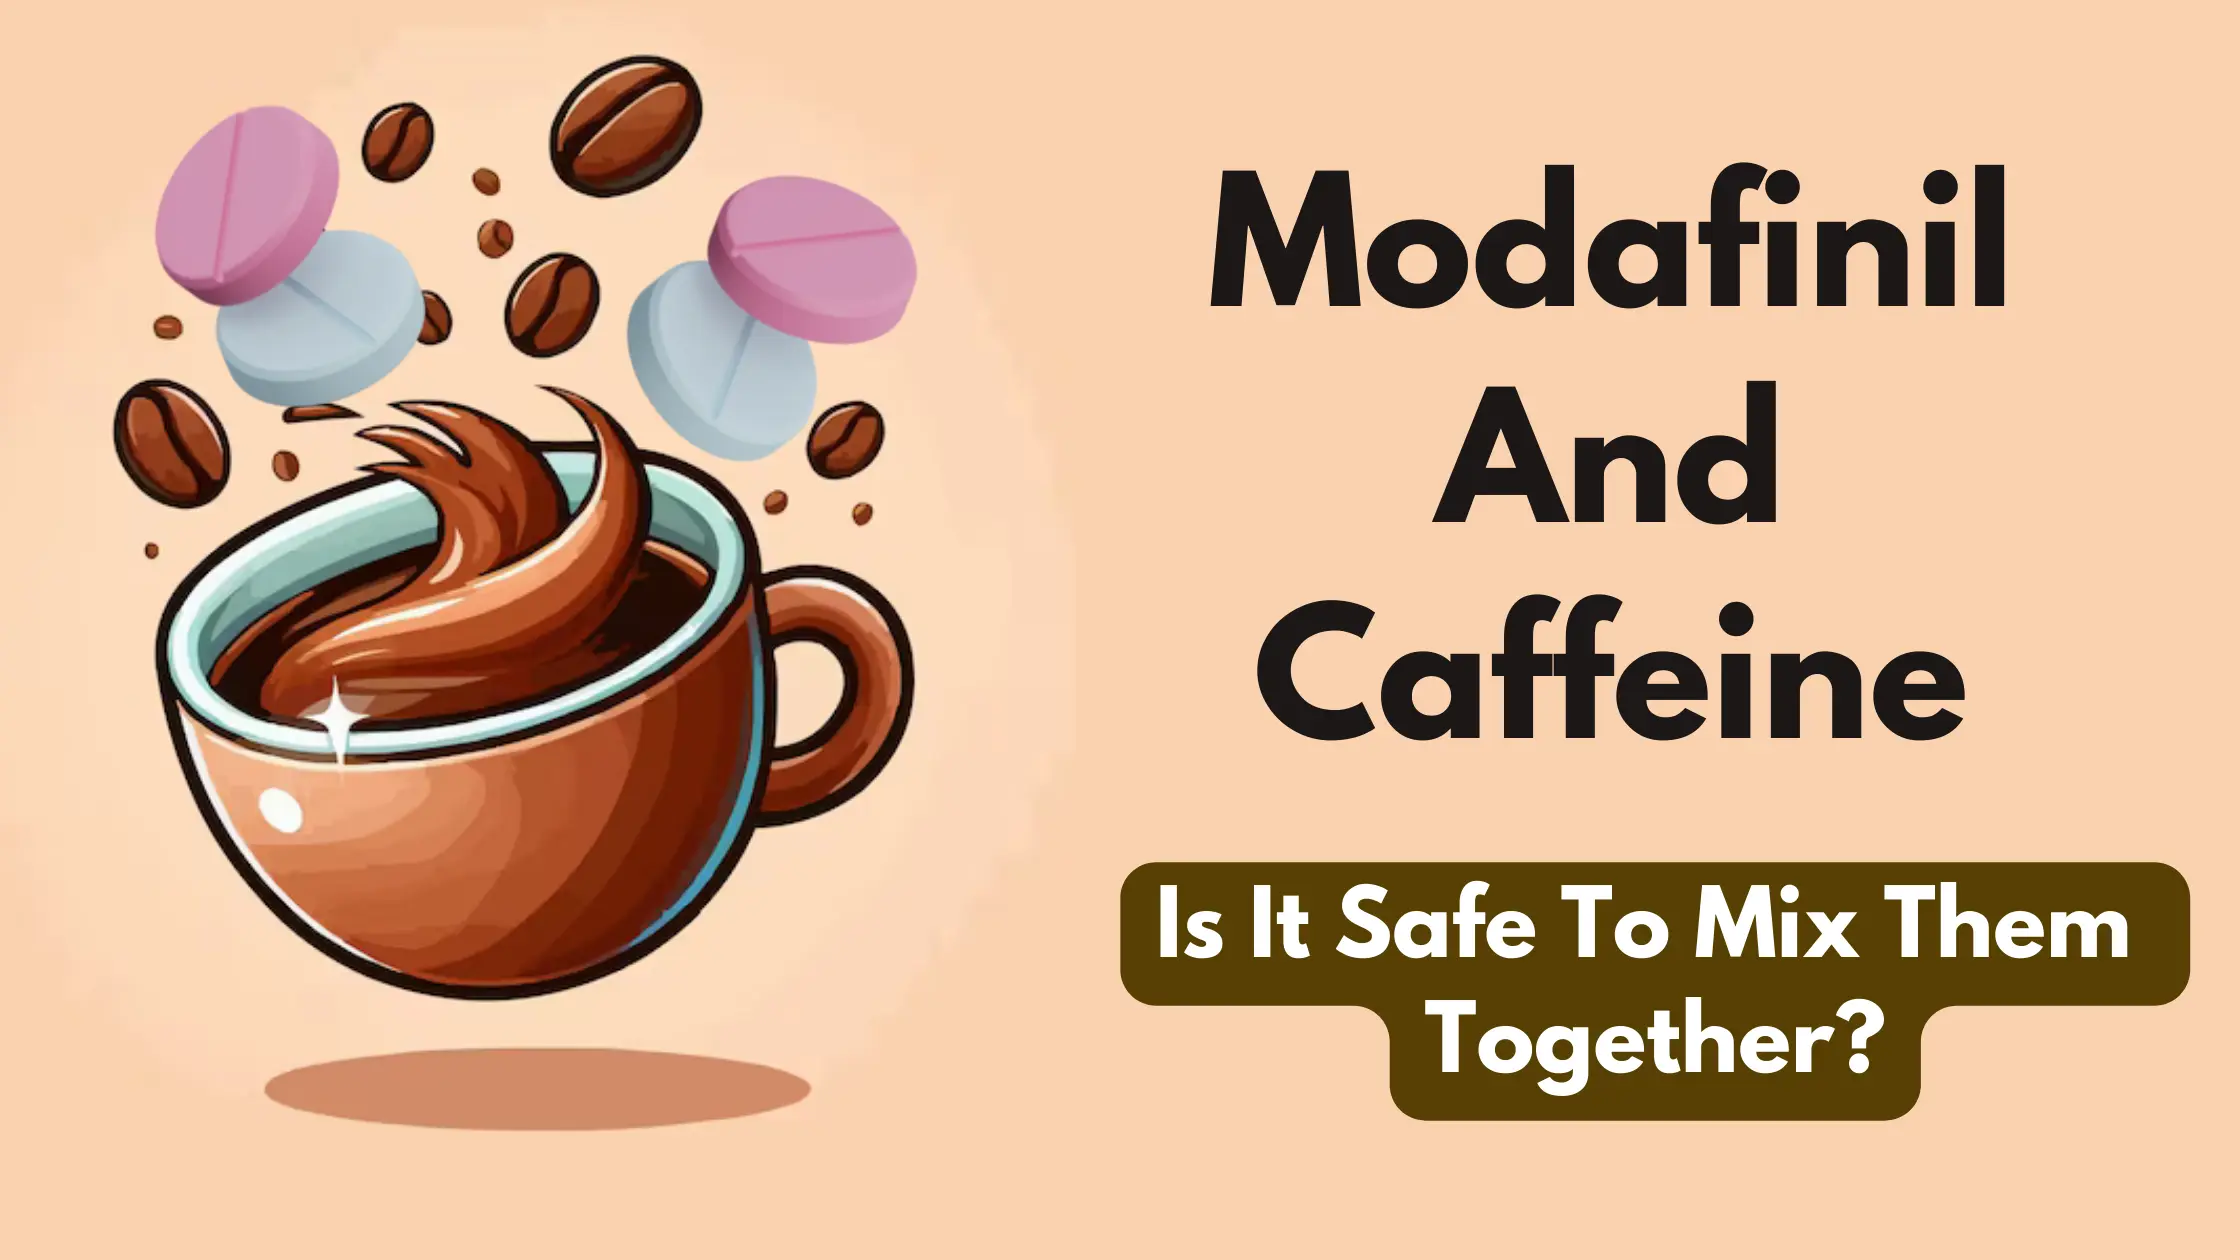 modafinil-and-caffeine-is-it-safe-to-mix-them-together